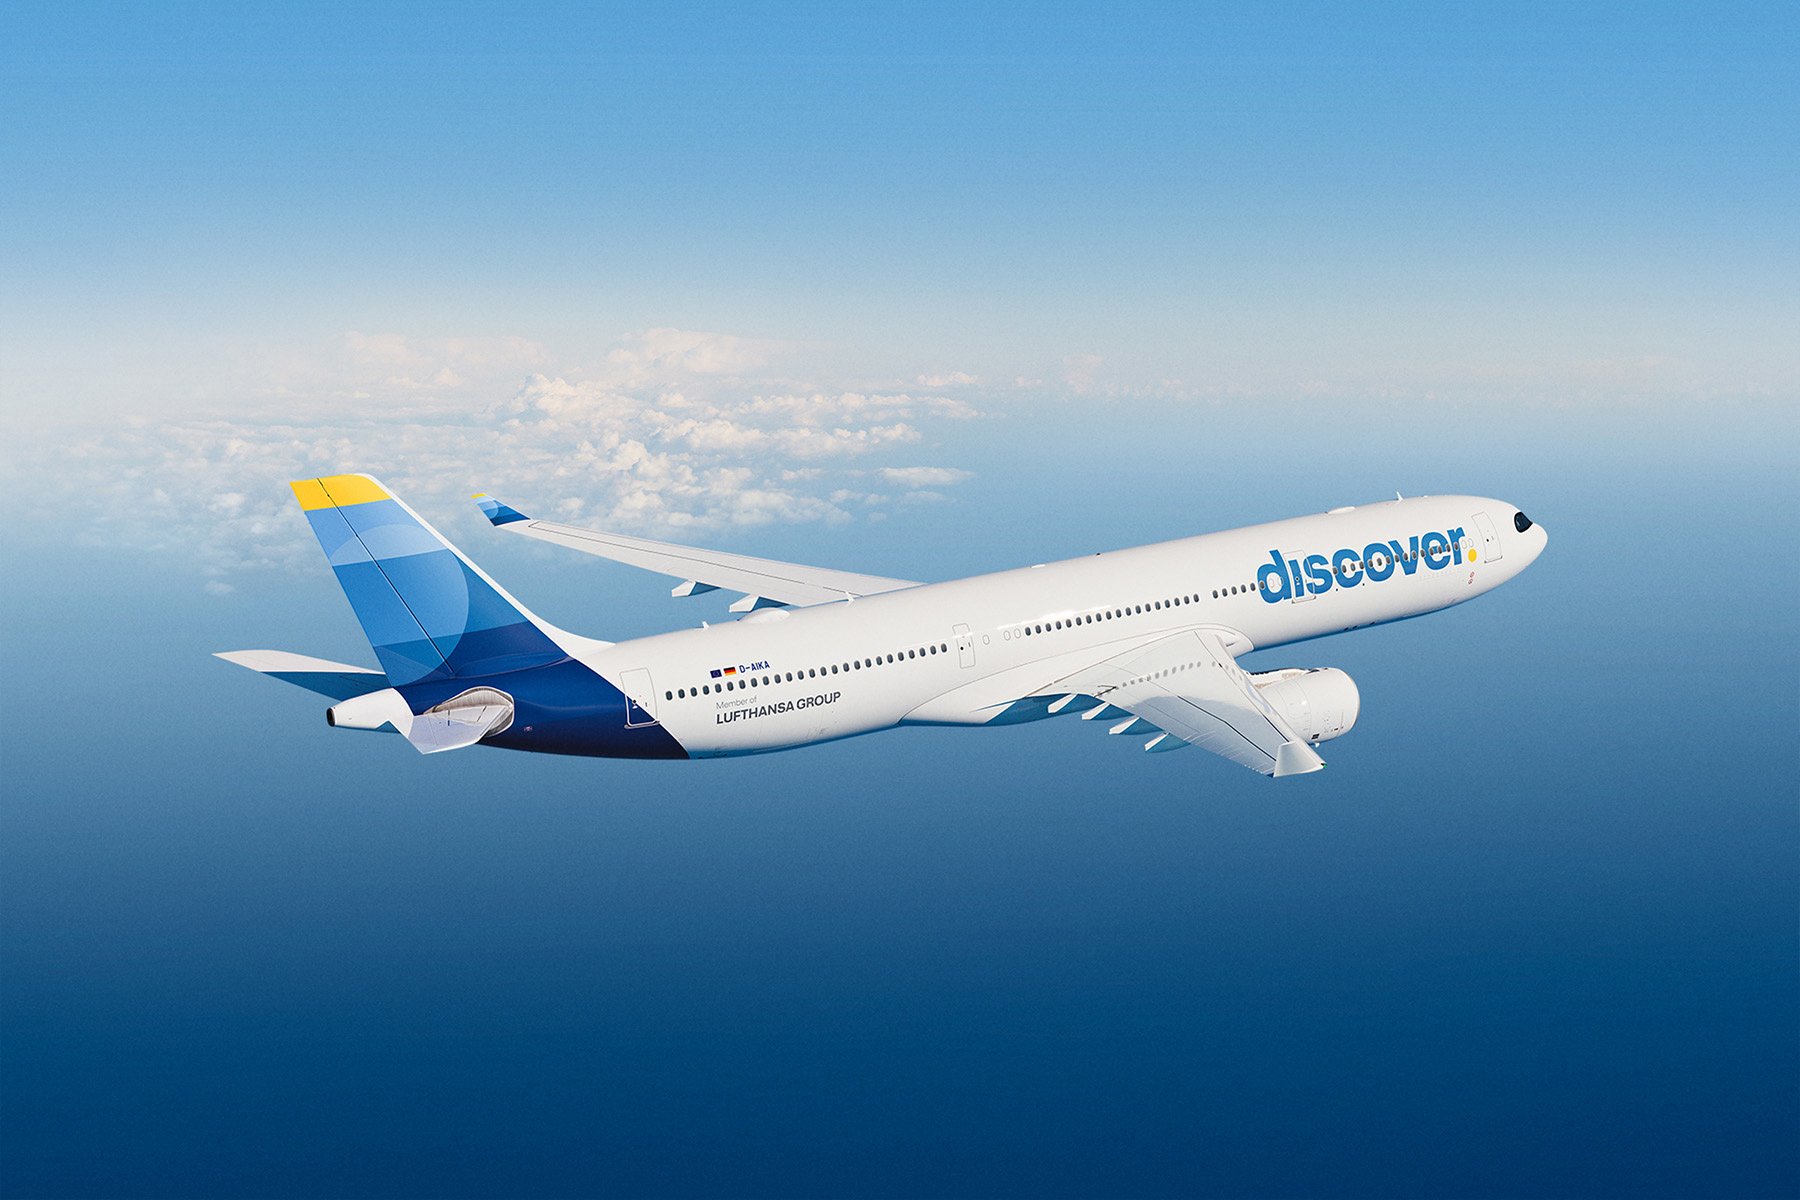 www.discover-airlines.com